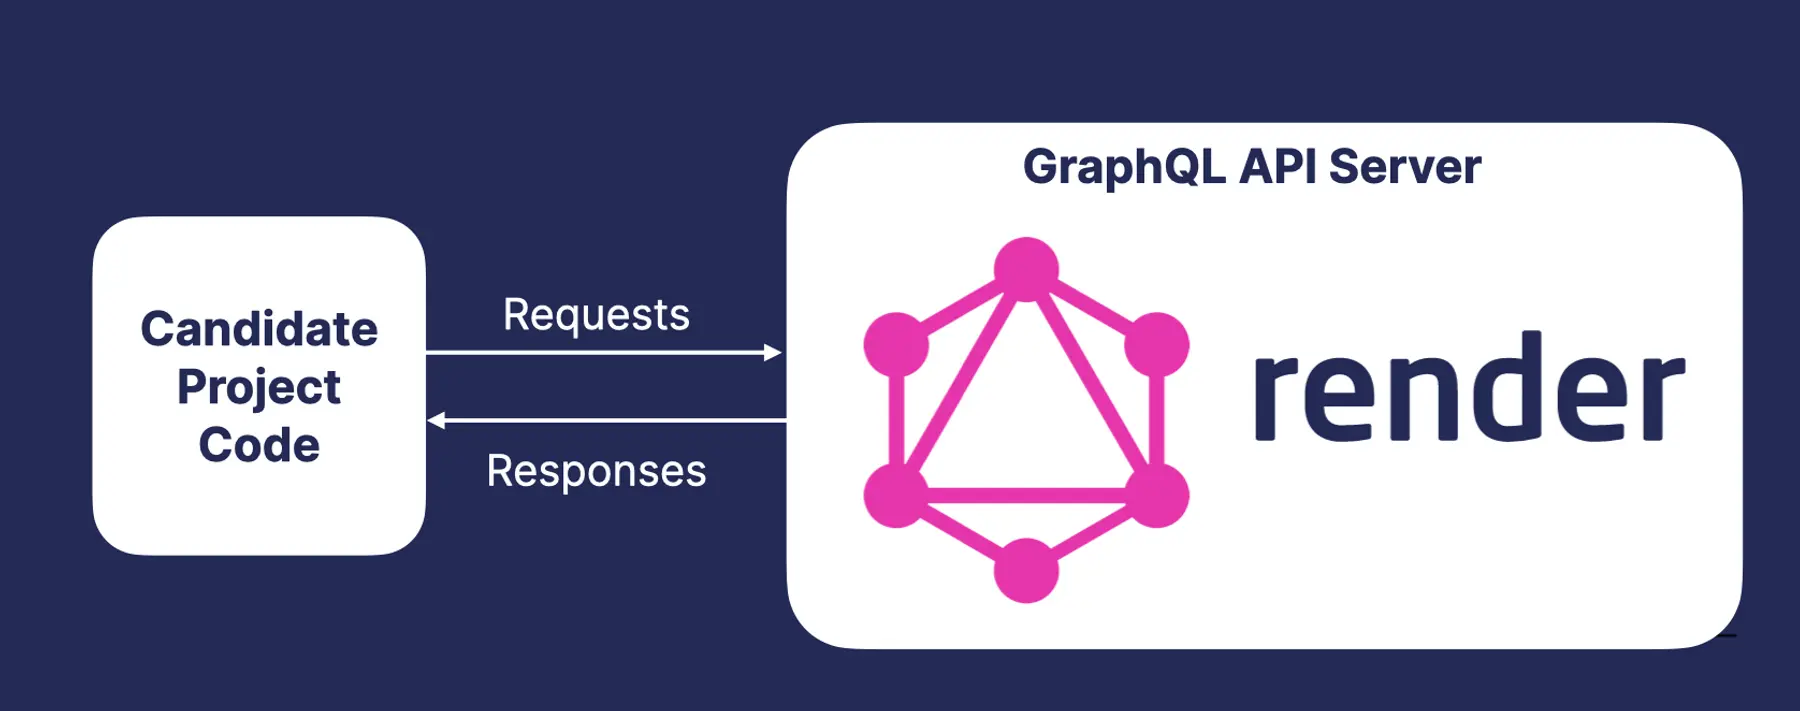 We built a custom GraphQL API for our interview process, hosted on Render, to create a more realistic scenario.